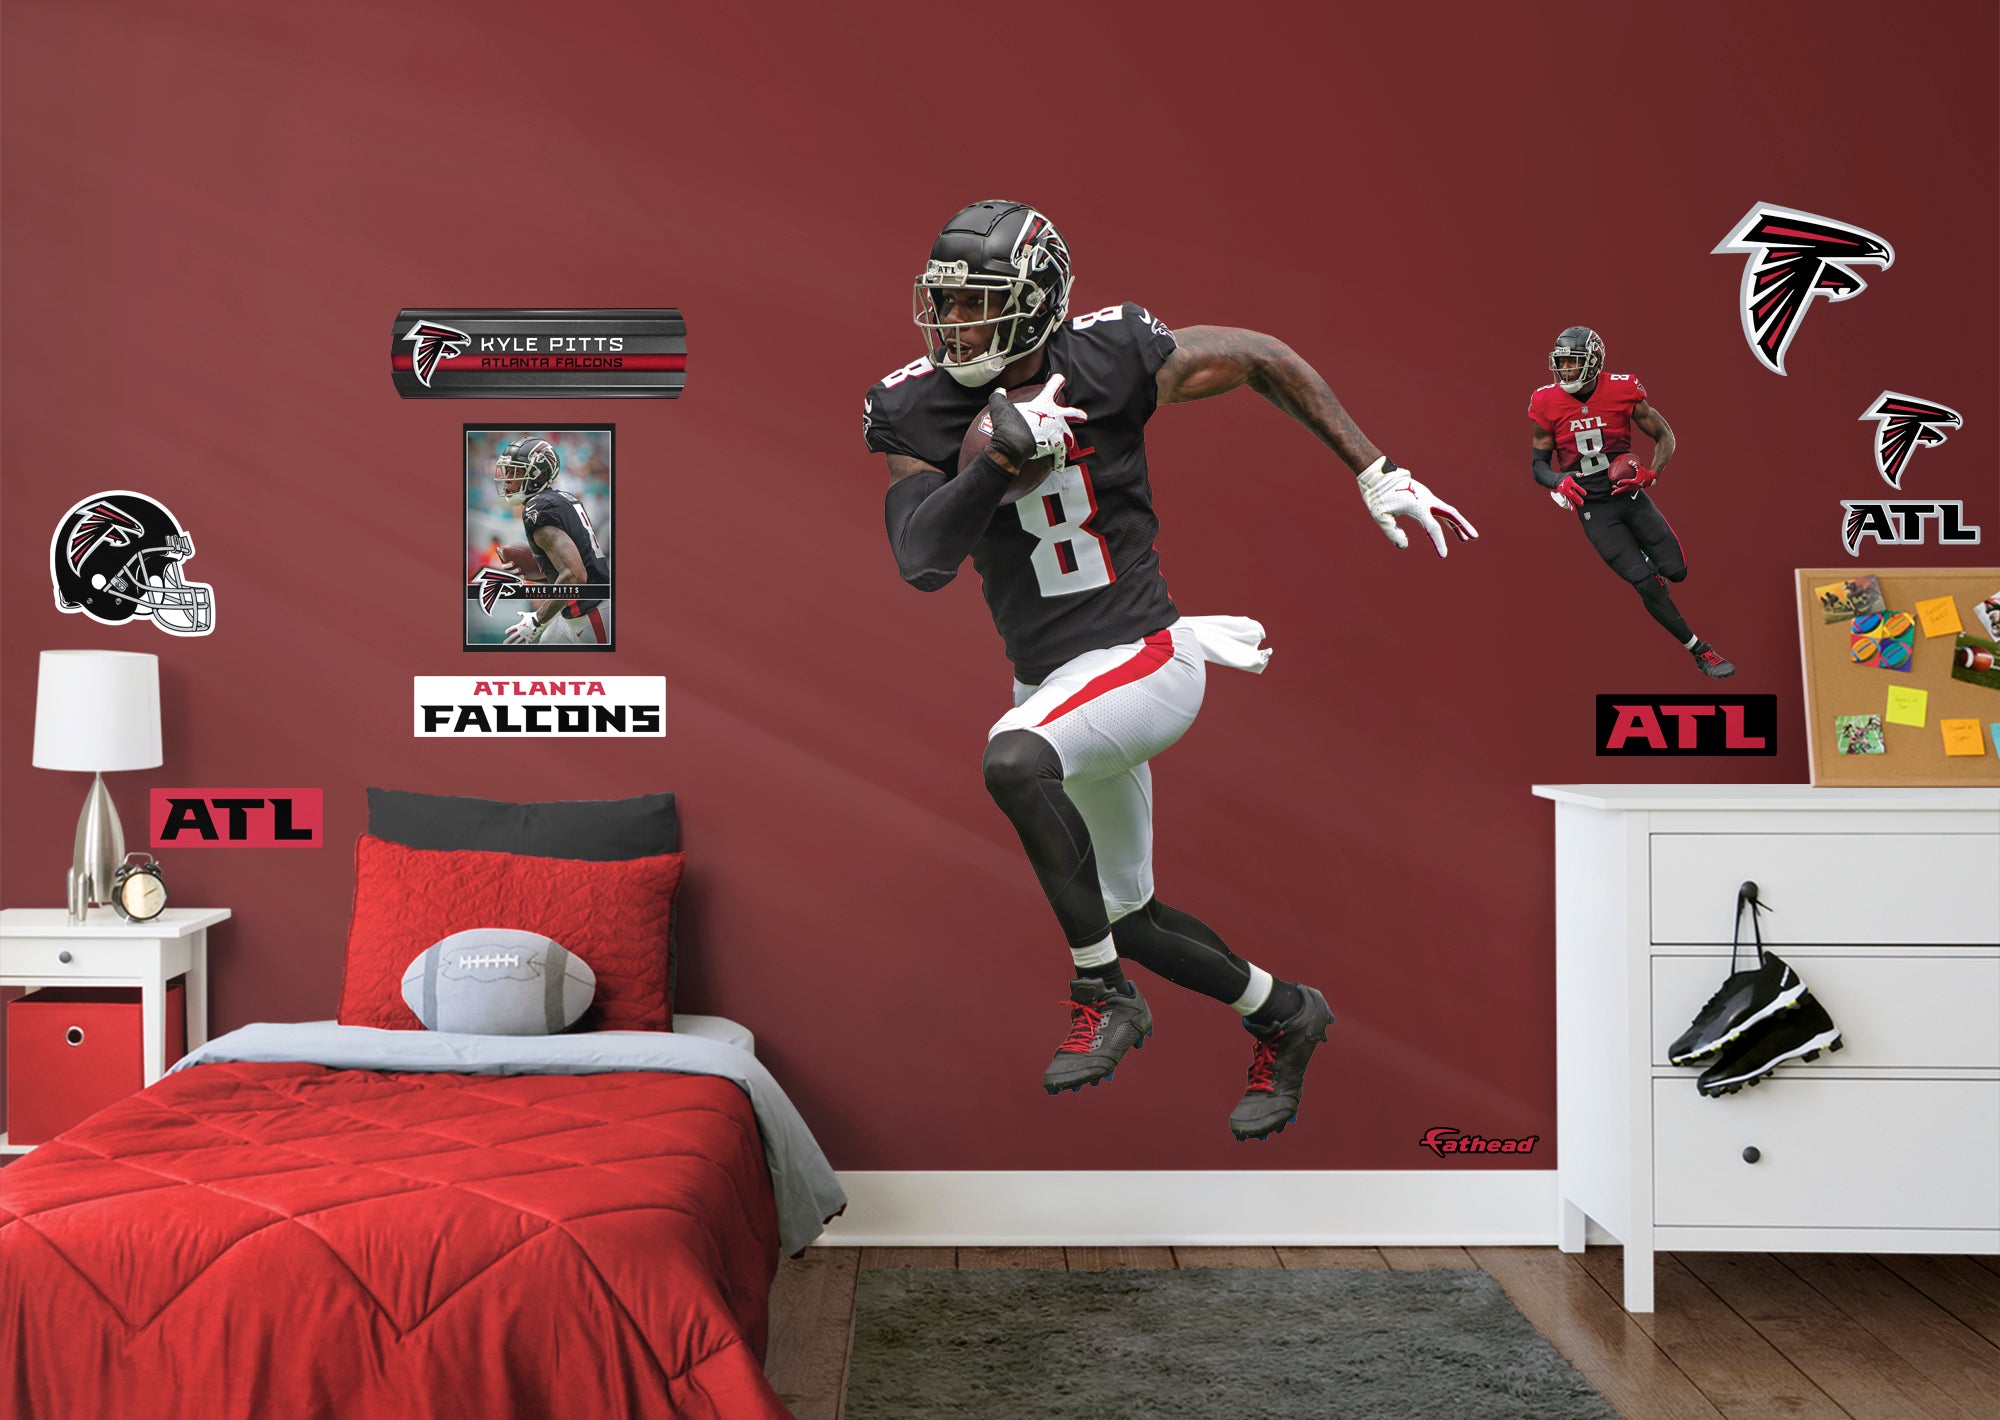 Atlanta Falcons: Kyle Pitts 2021 - NFL Removable Adhesive Wall Decal Life-Size Athlete +2 Wall Decals 51'W x 78'H